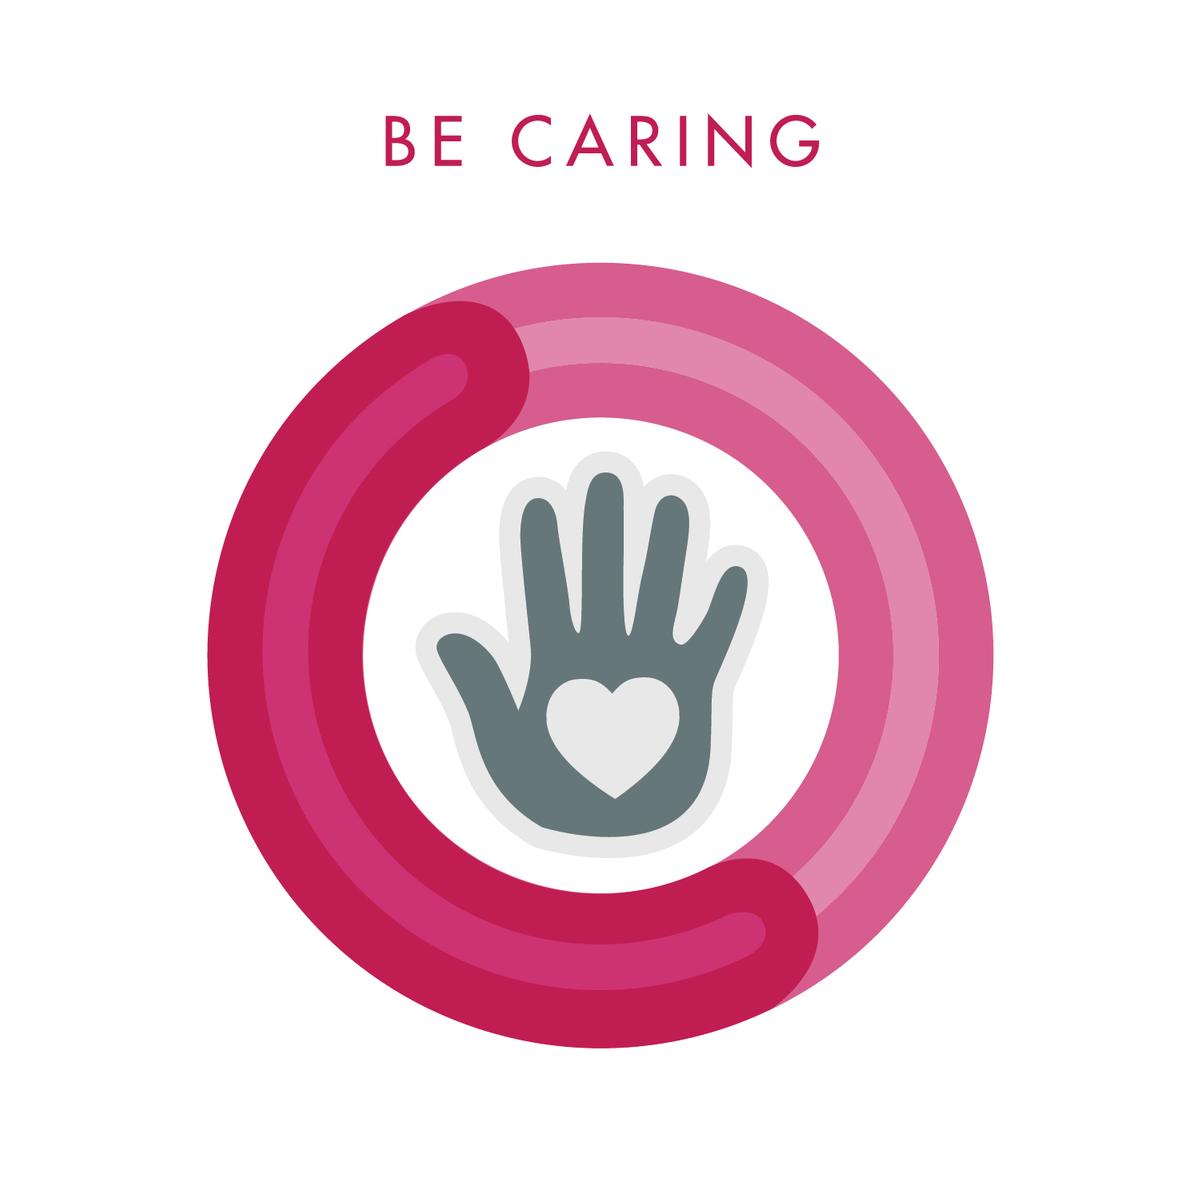 Be caring